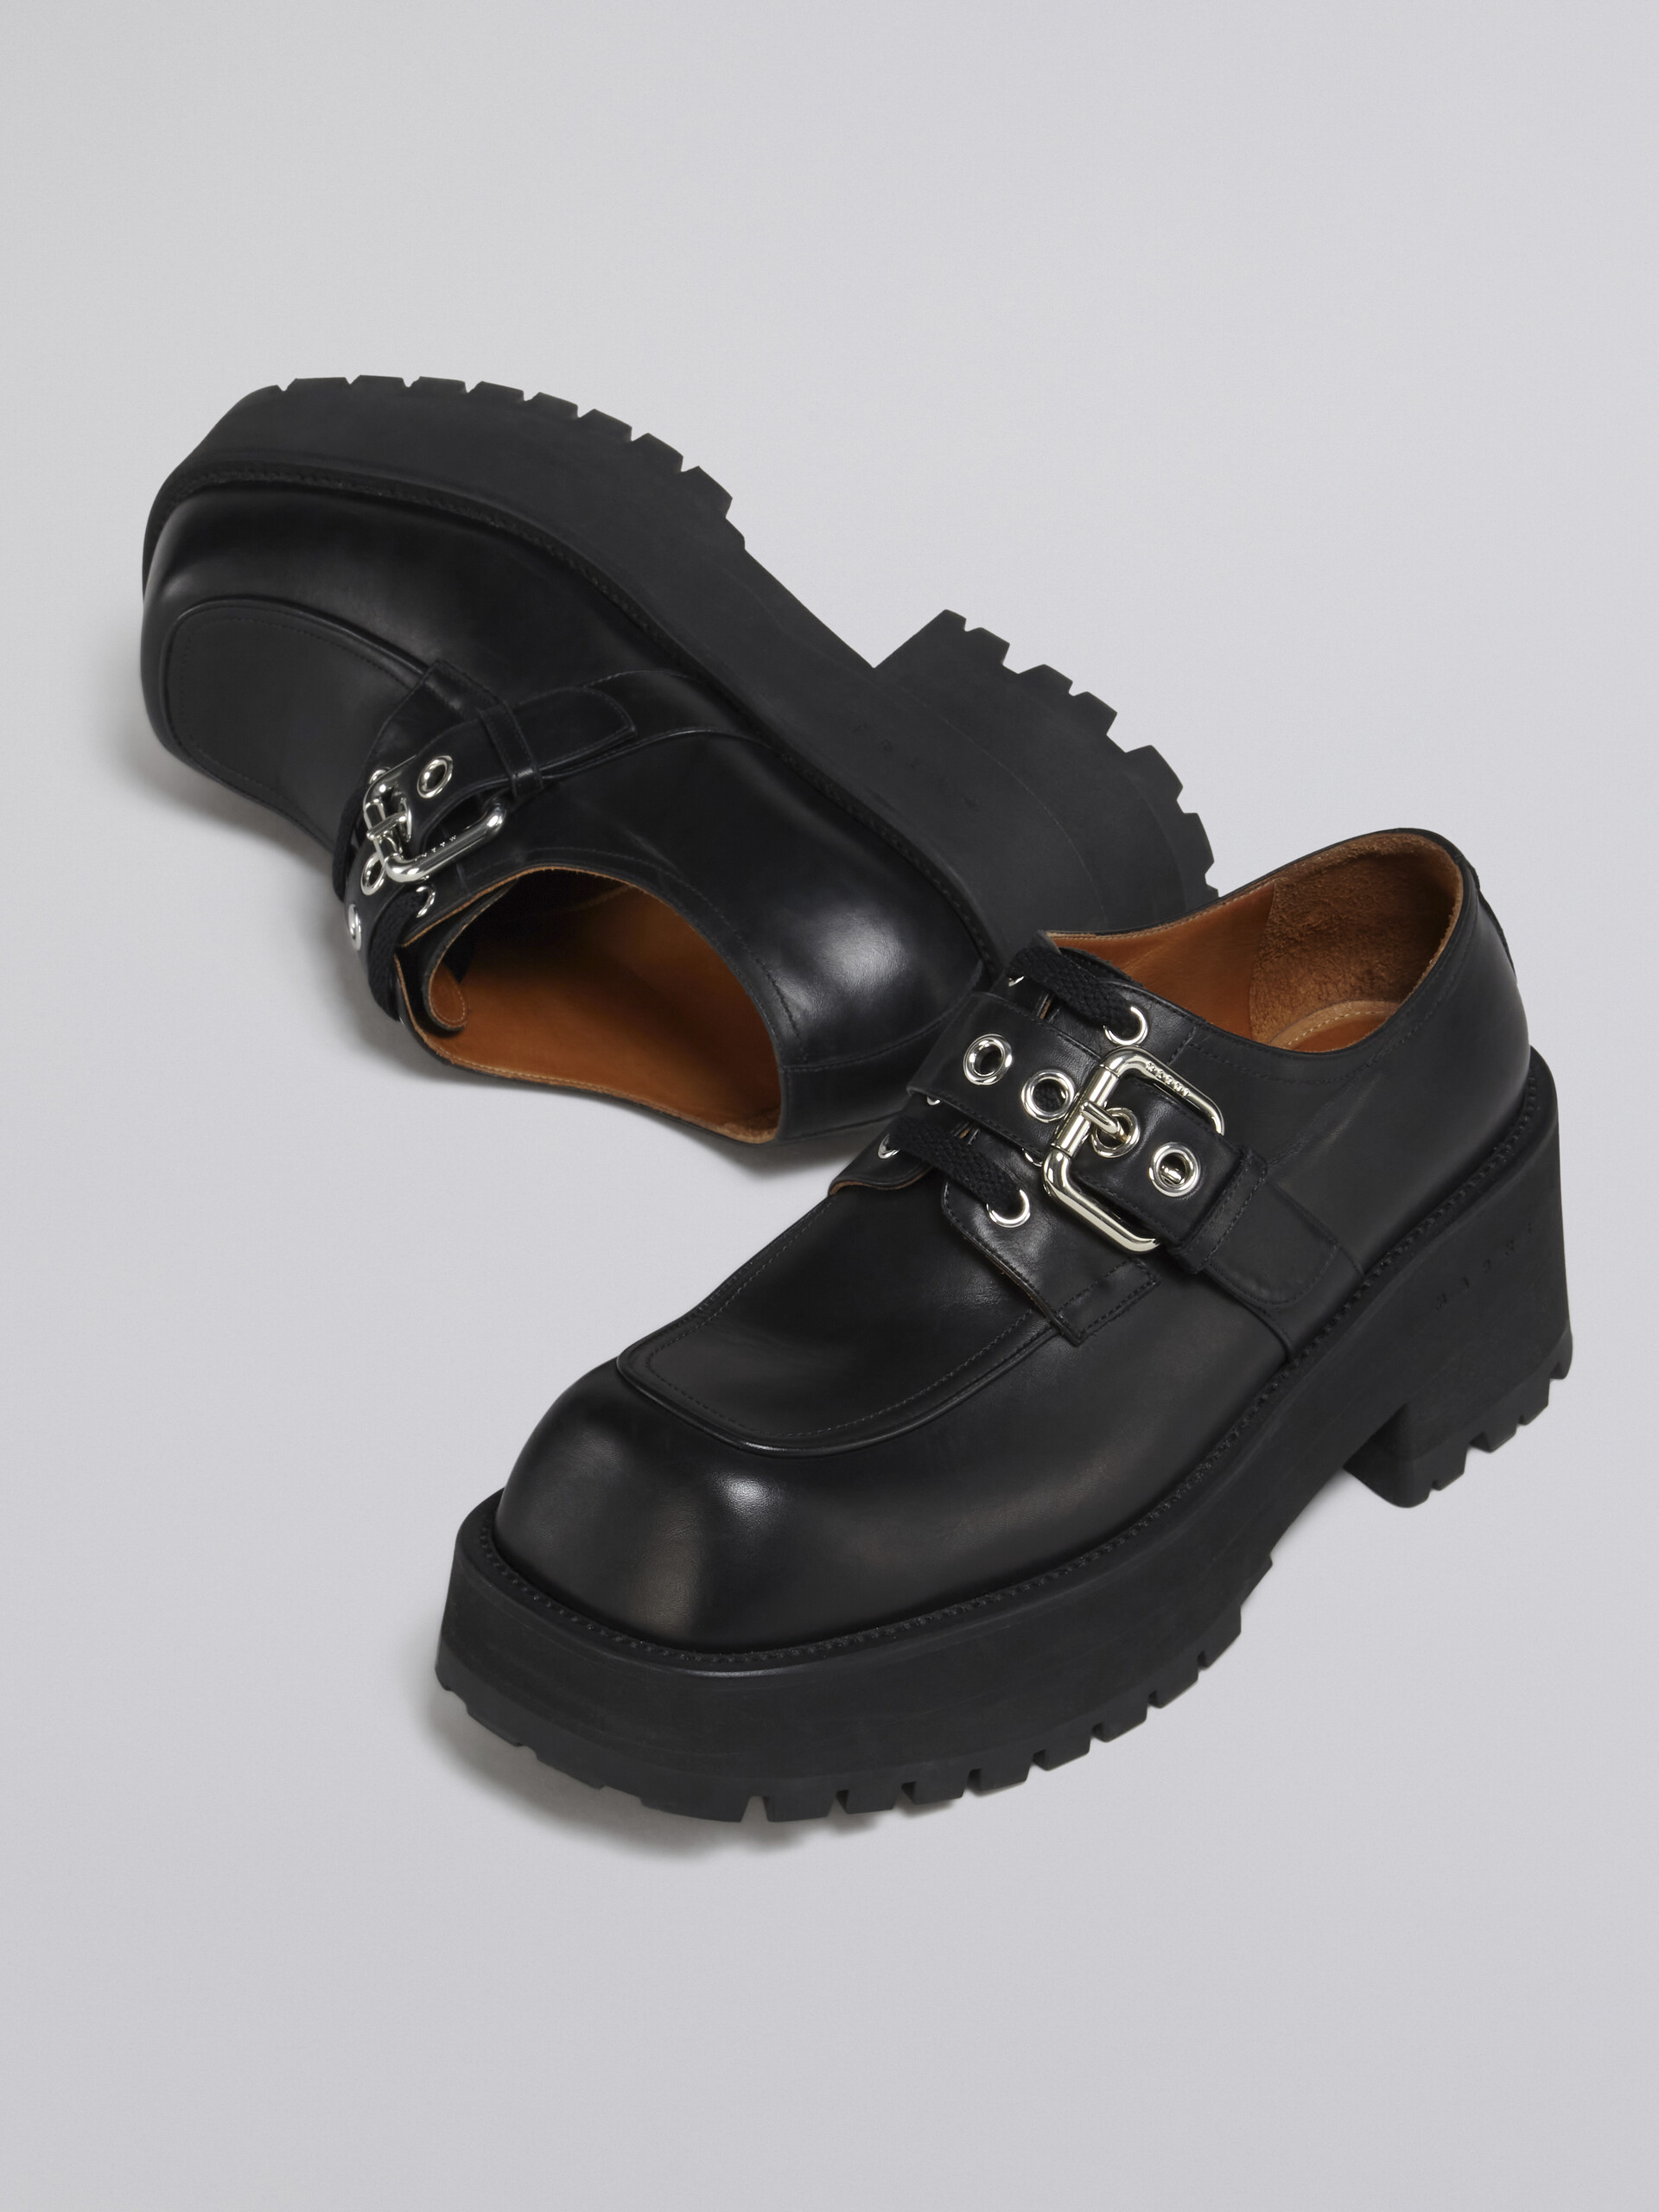 Black soft calf leather moccasin - Lace-ups - Image 5